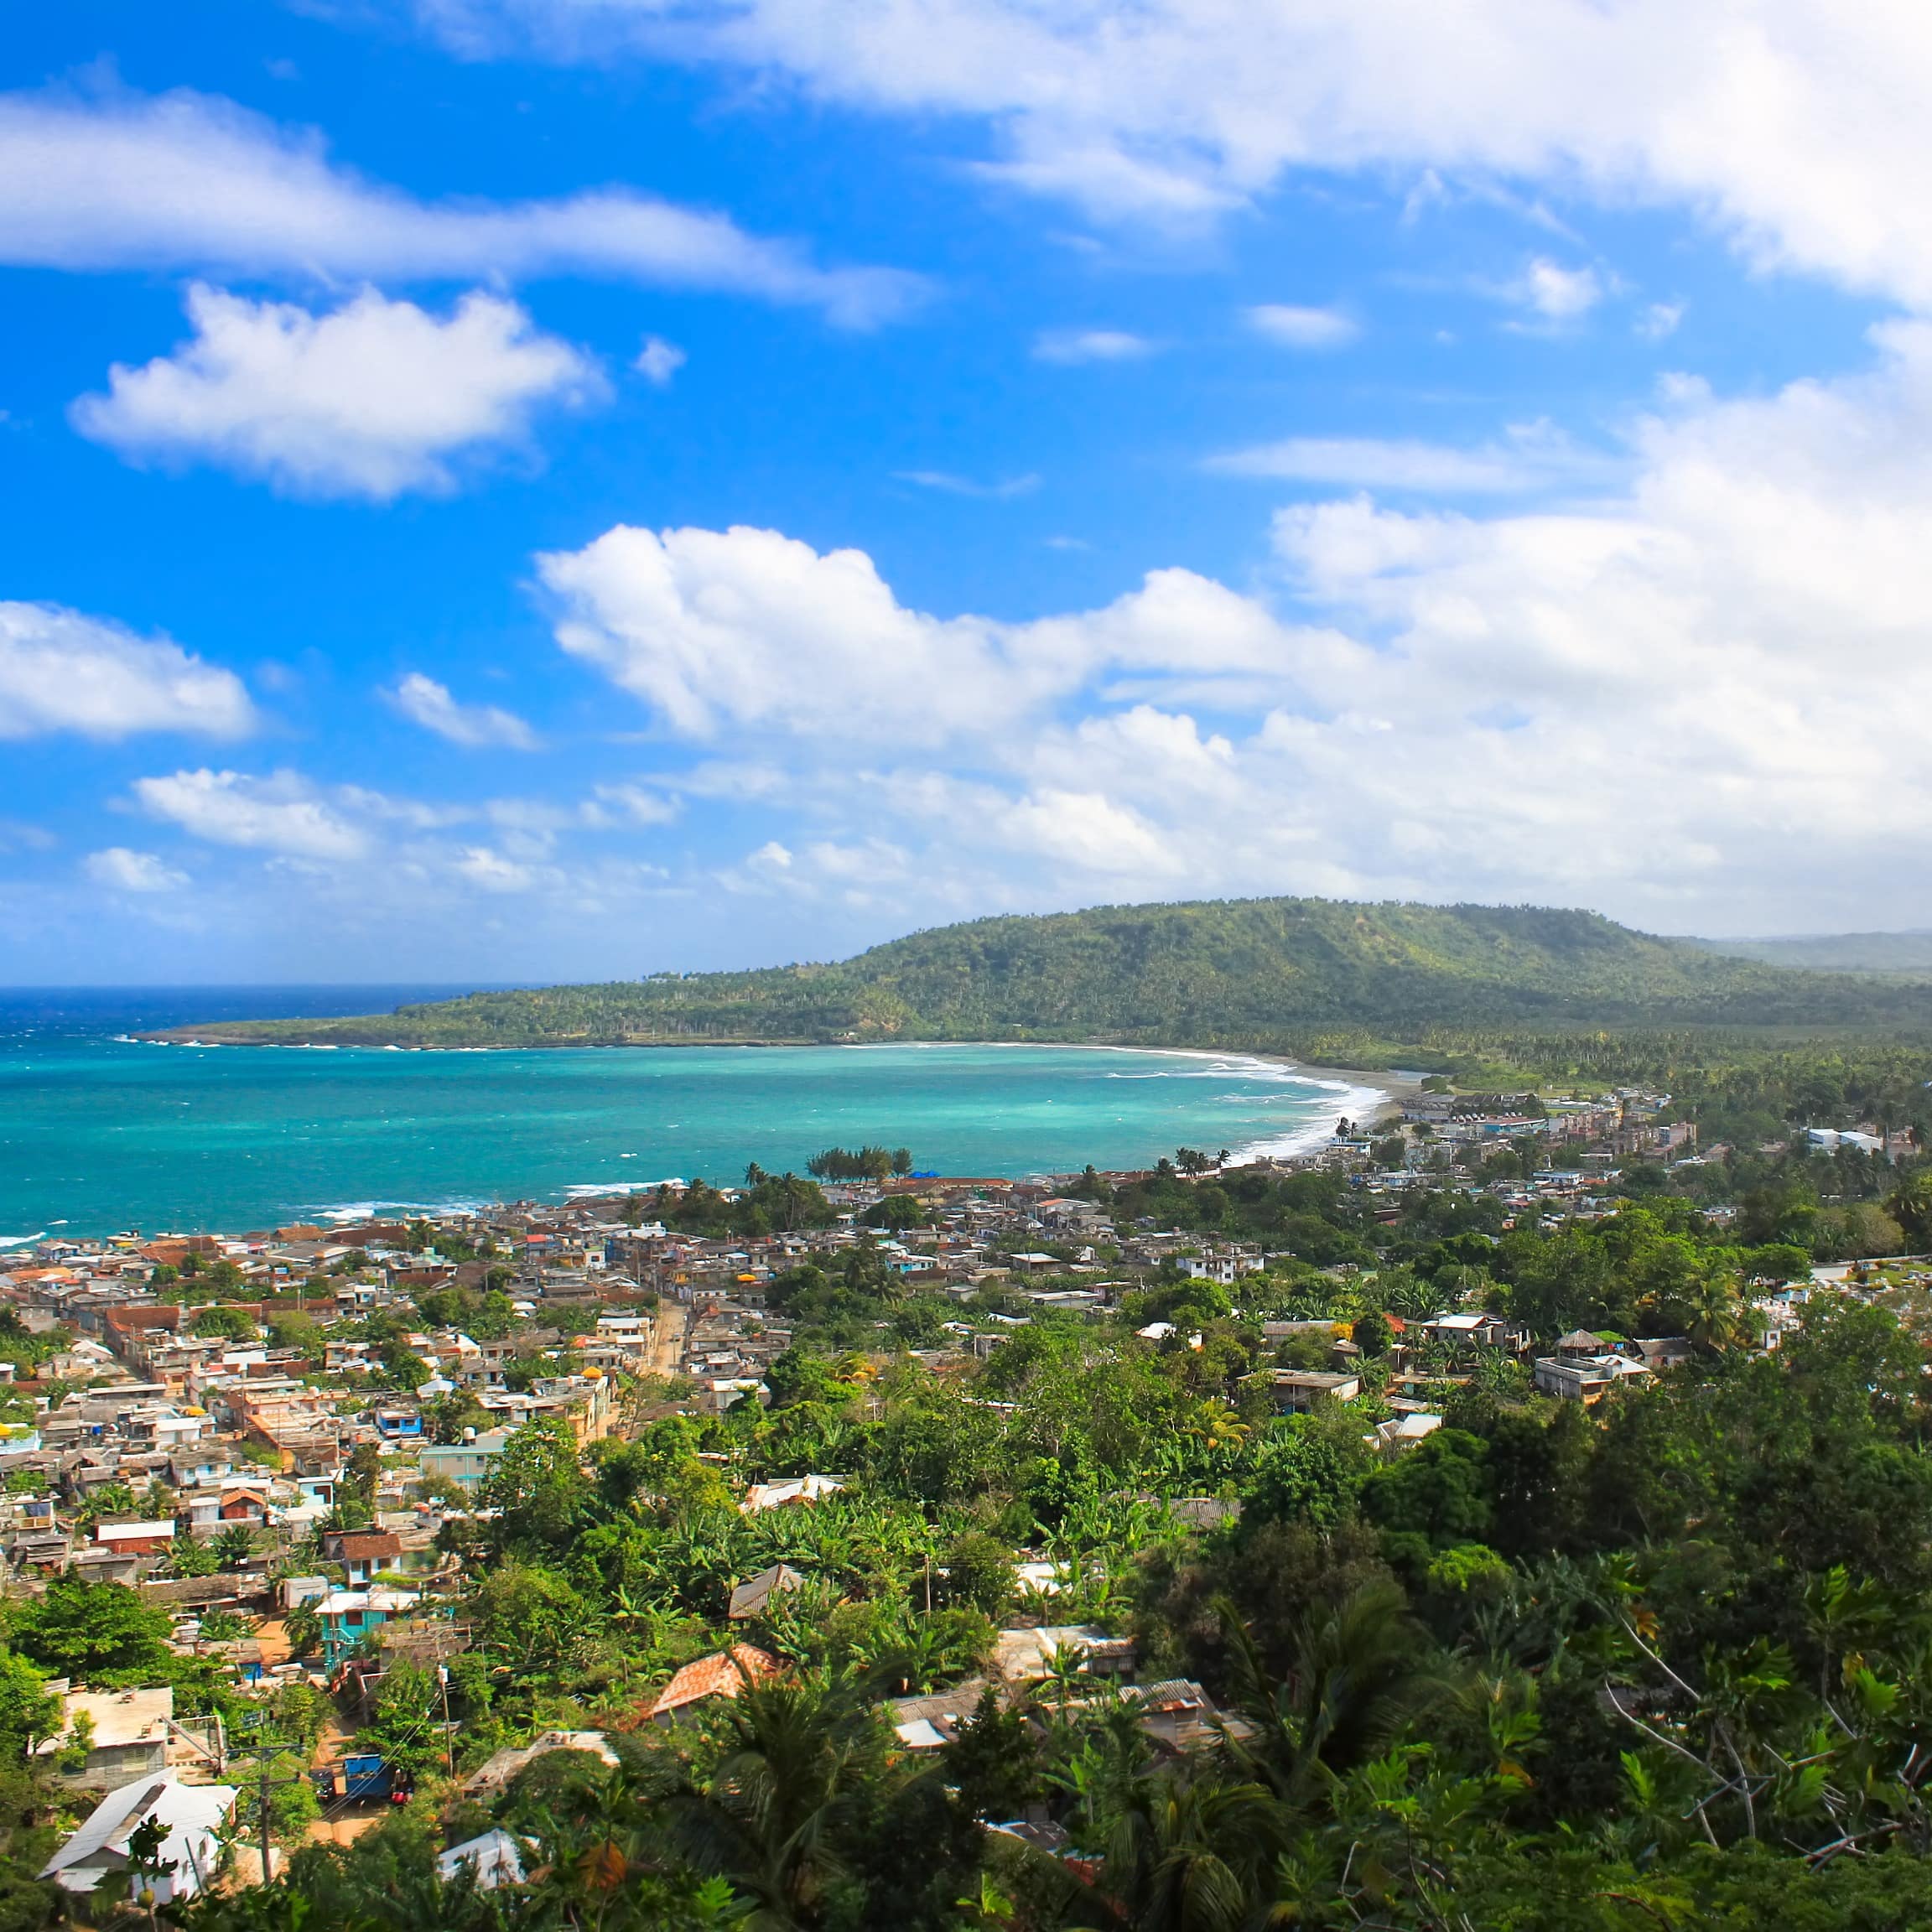 Panoramic view of Baracoa, Cuba with its neighbourhoods among lush green trees and turquoise waters